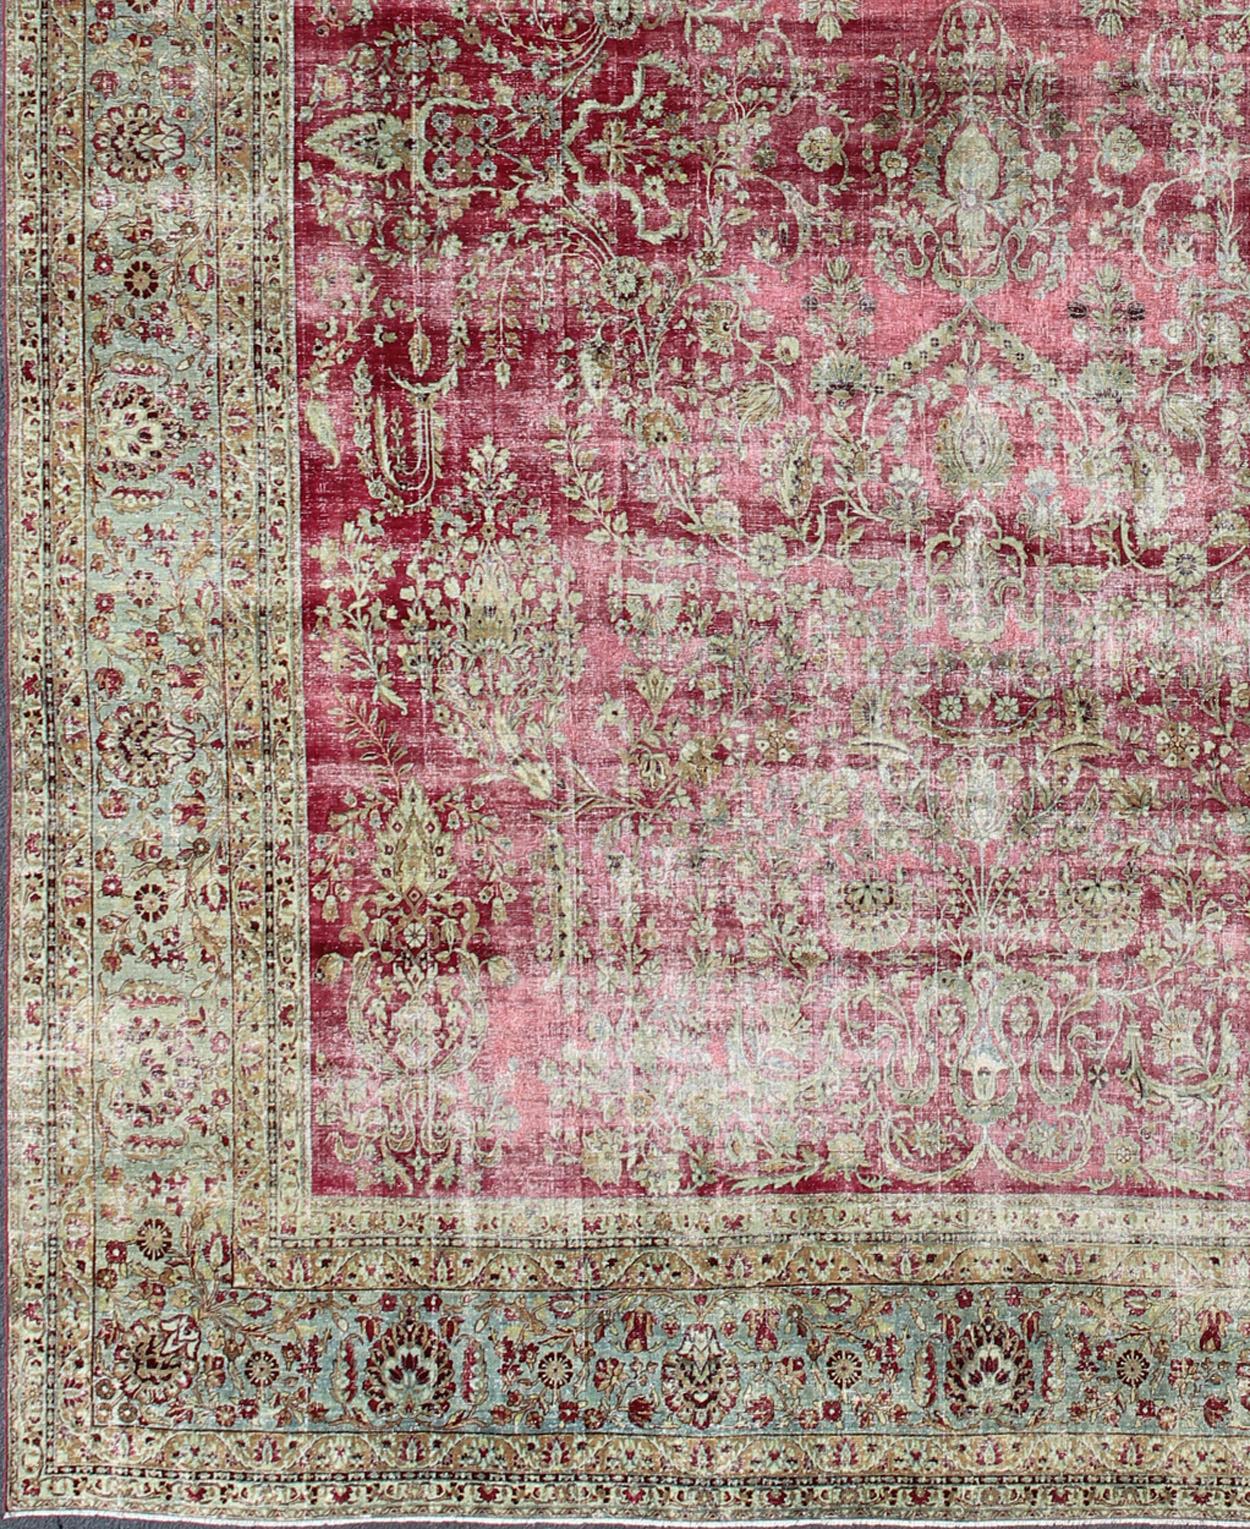 Distressed Antique Persian Lavar Kerman Rug in All-Over Intricate Floral Design. Keivan Woven Arts / rug B-0404, country of origin / type: Iran / Kerman , circa 1900. 
Measures: 12'9 x 17'2 
This magnificent antique Kerman carpet from 1900 is an